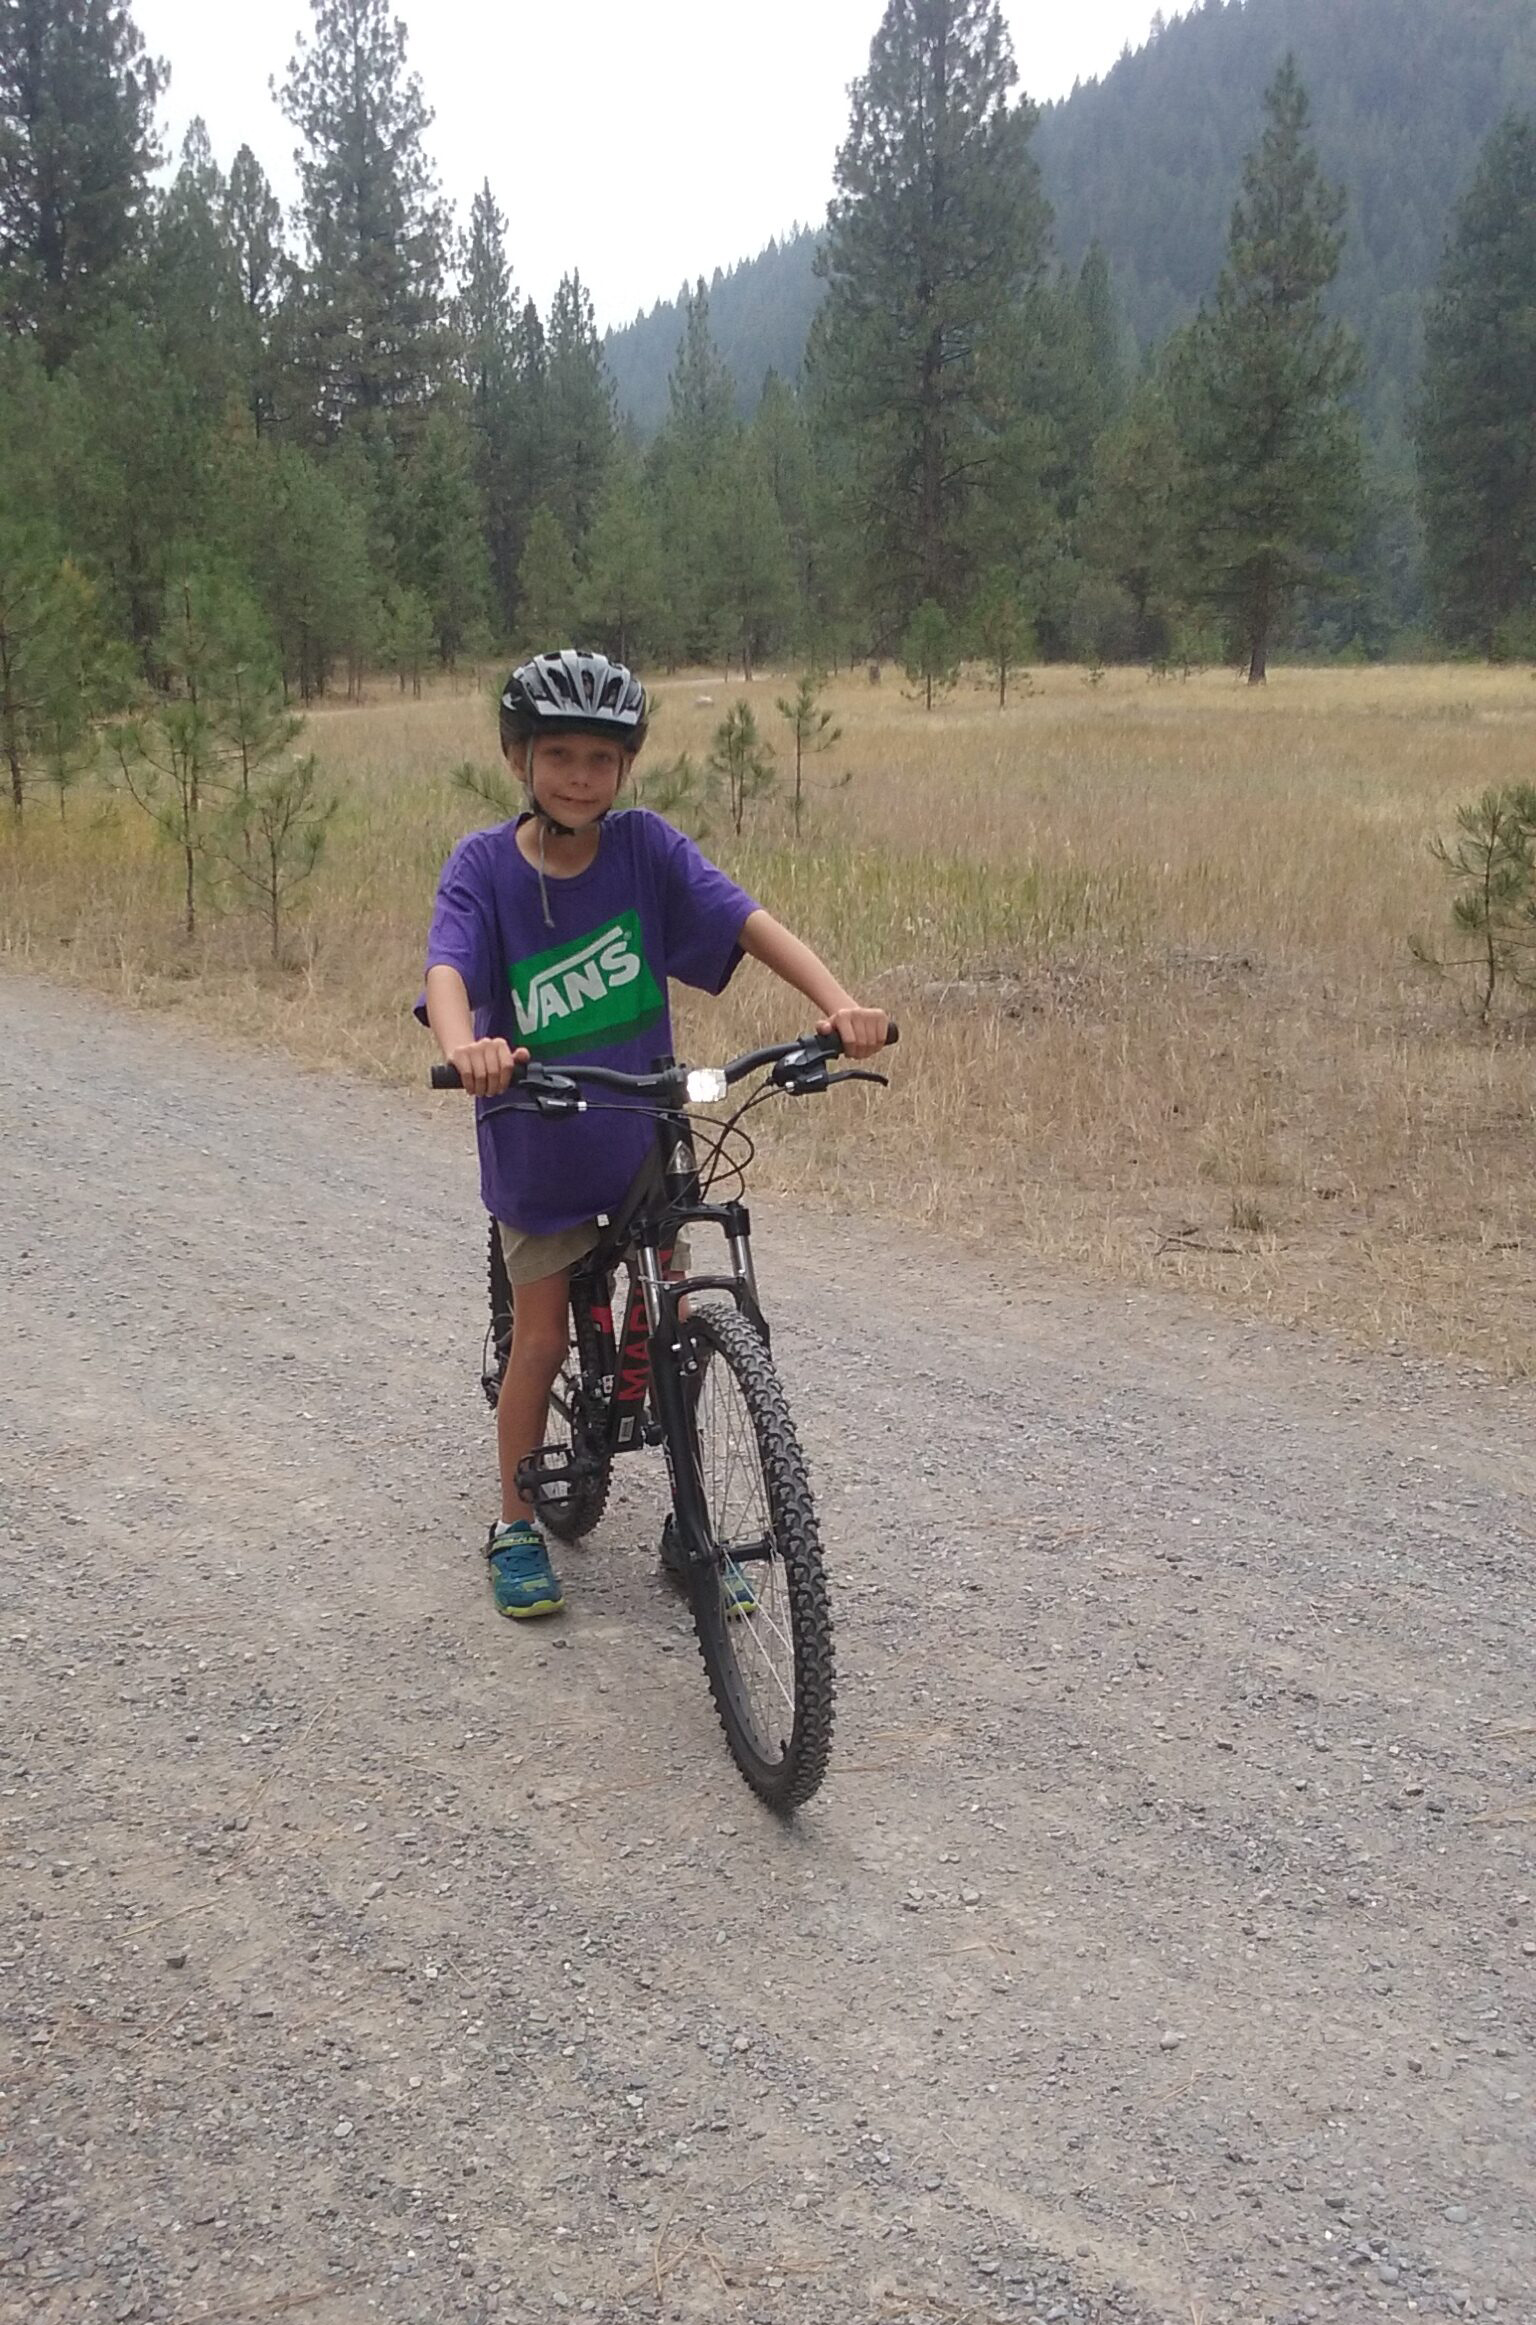 Missoula, Montana has a vast number of choices for kid-friendly mountain biking activities